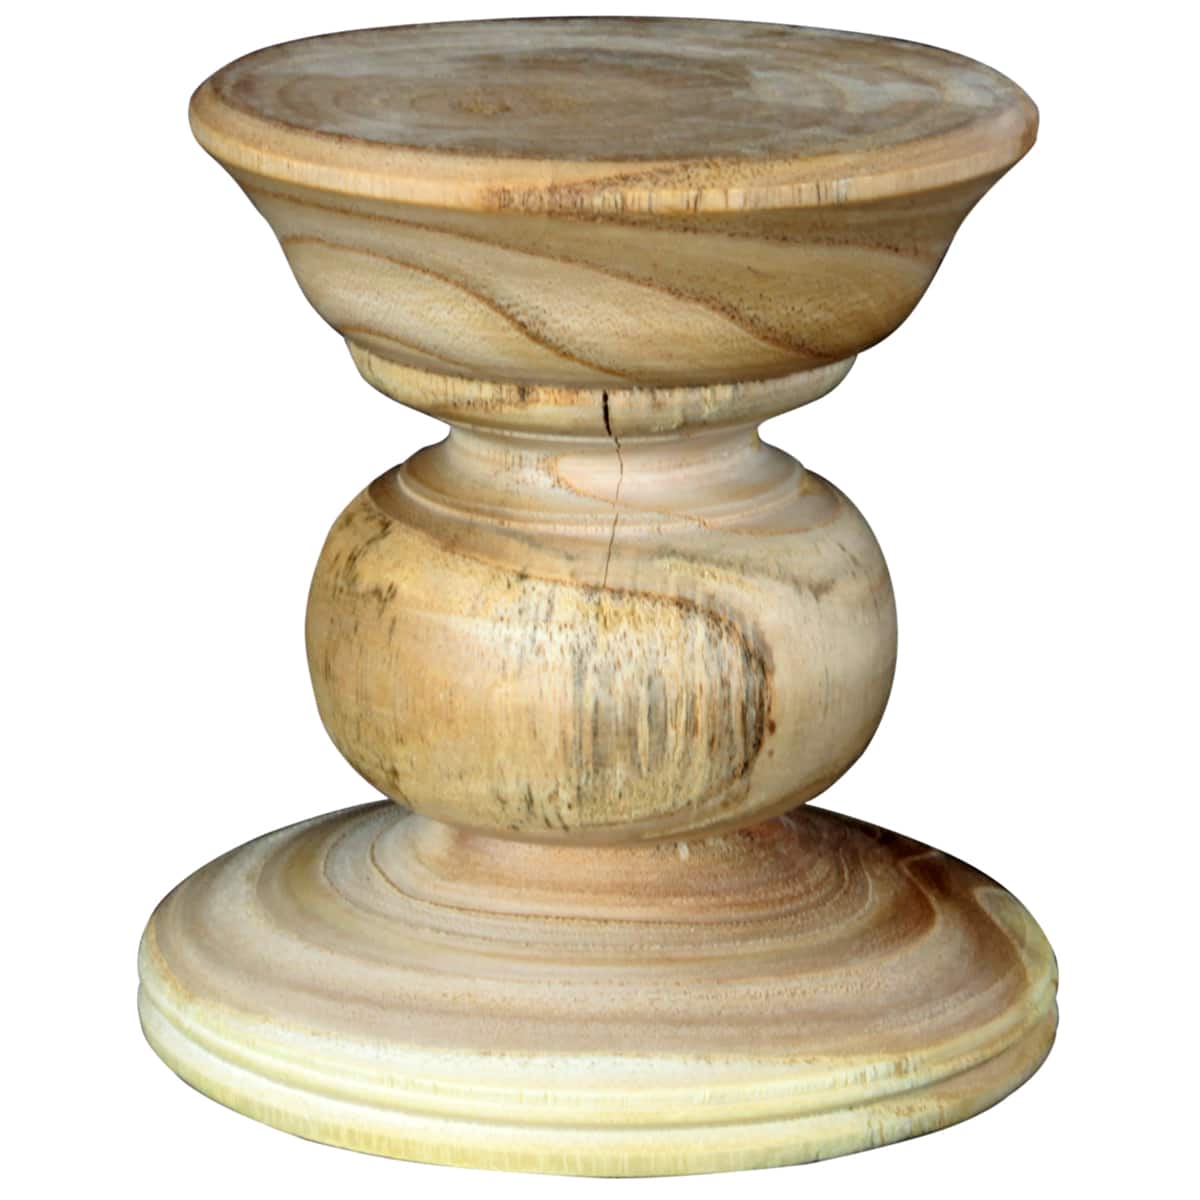 Unfinished Wood Pedestal By ArtMinds®